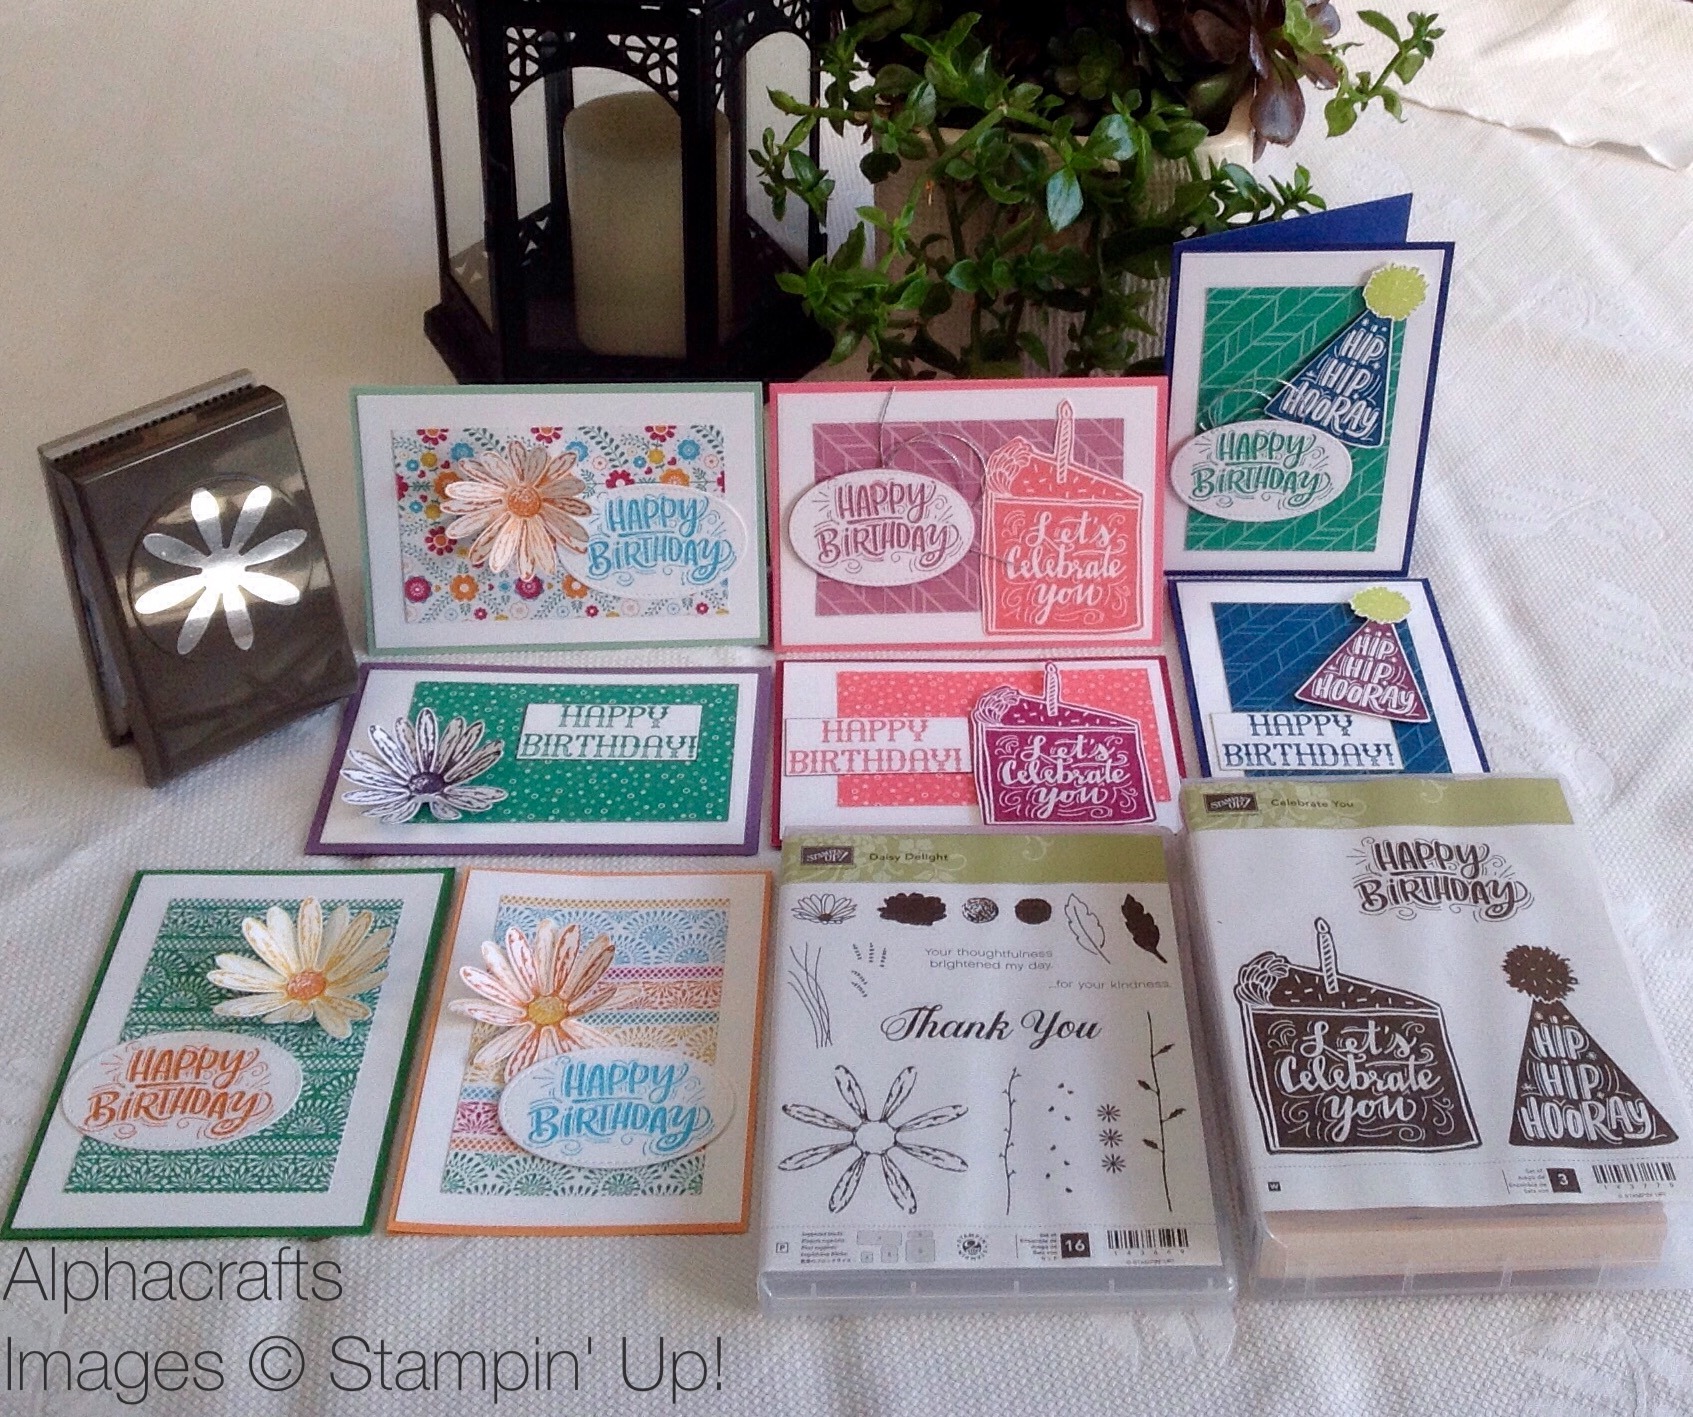 Handmade cards using the Celebrate You stamp set and Daisy Delight Bundle from Stampin' Up!.